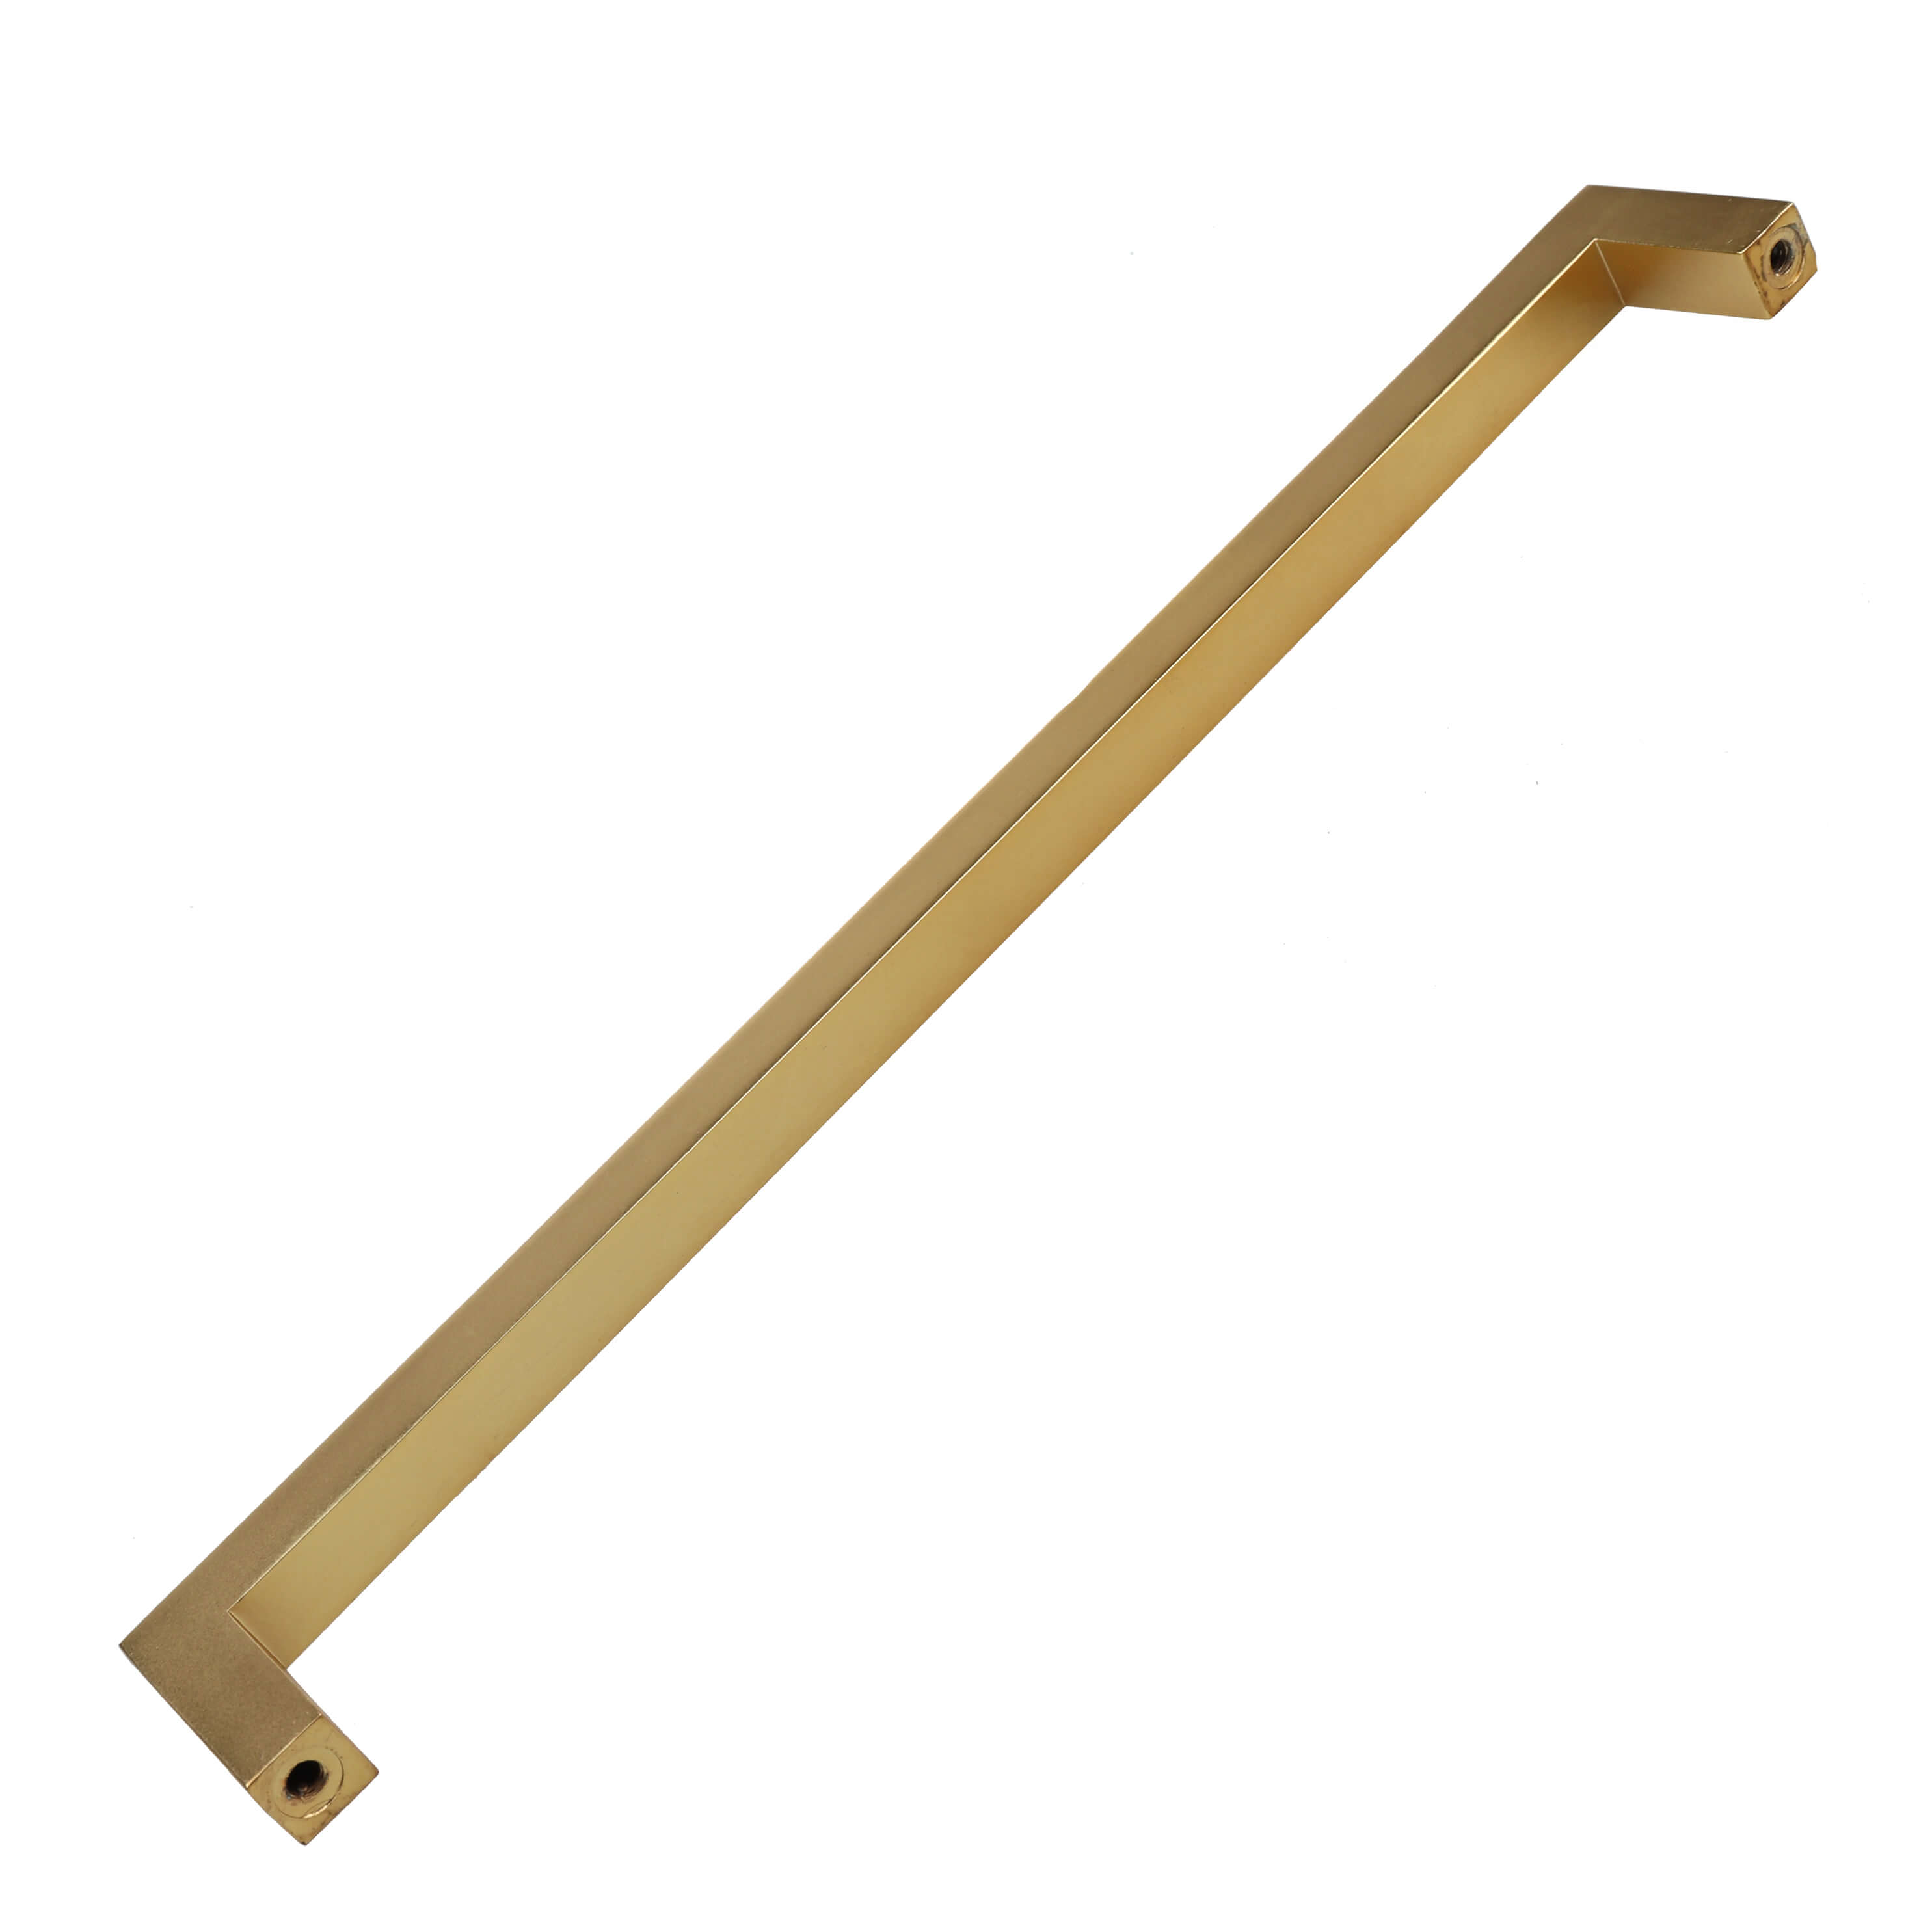 GlideRite 8-3/4 in. Center Solid Square Bar Cabinet Pulls, Brass Gold, Pack of 25 - image 3 of 3